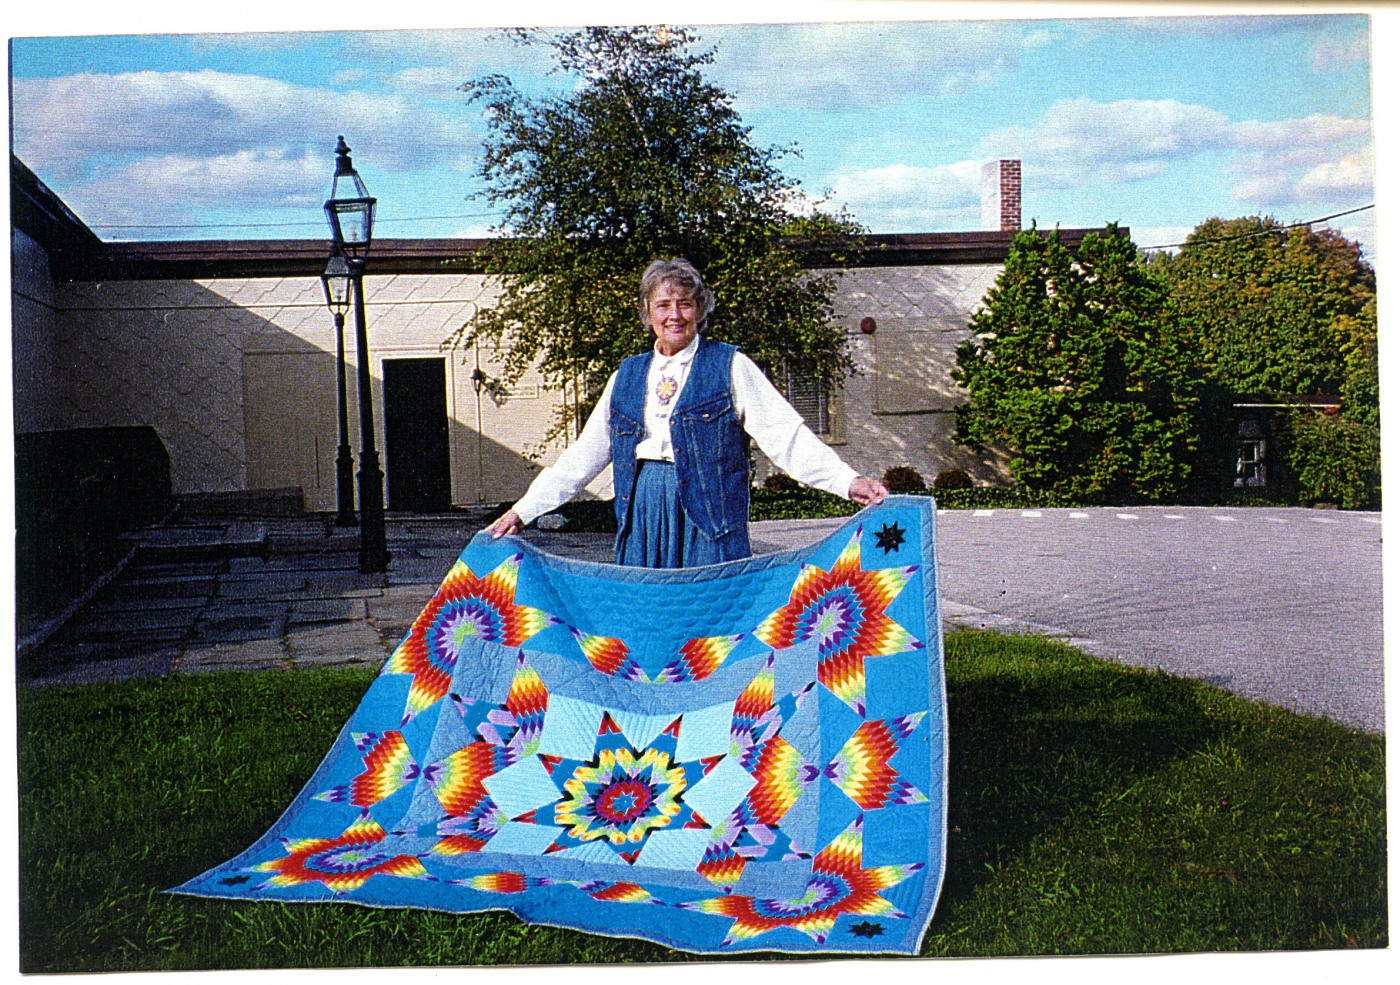 Photo of Barbara Hail, white woman with short hair, holding a large patchwork blanket in front of the Haffenreffer Museum in Bristol, RI.